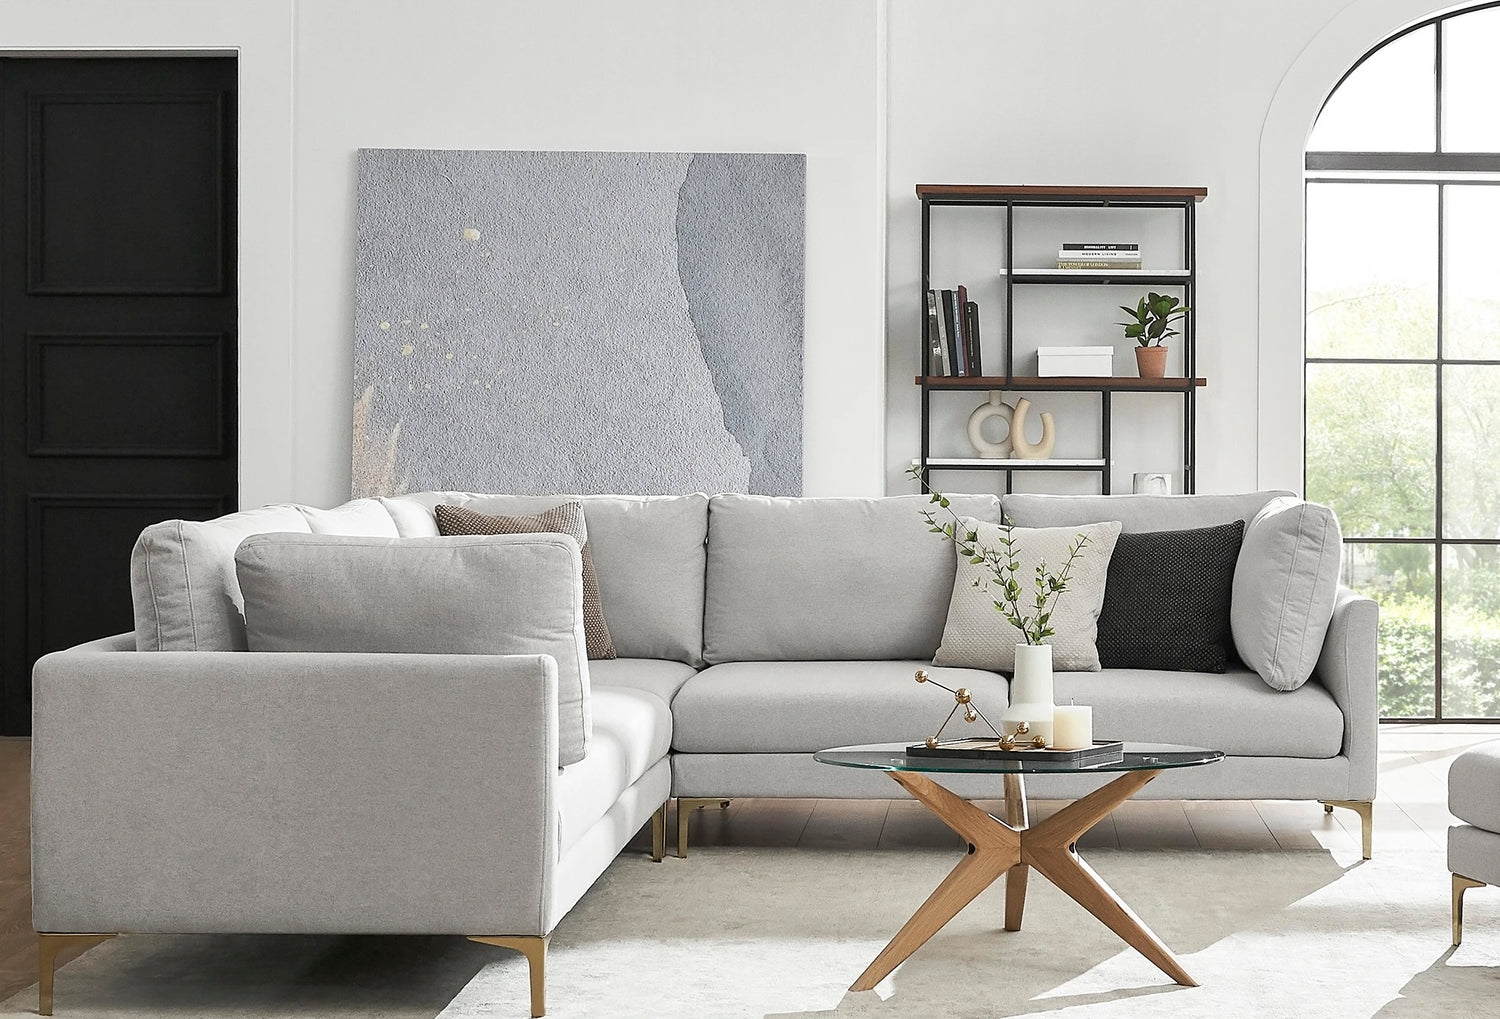 A modern living room featuring a light gray sectional sofa with various cushions, a round glass coffee table with wooden legs, and a tall black shelf holding books and decor. A large abstract painting hangs on the wall, and natural light streams in through nearby windows.